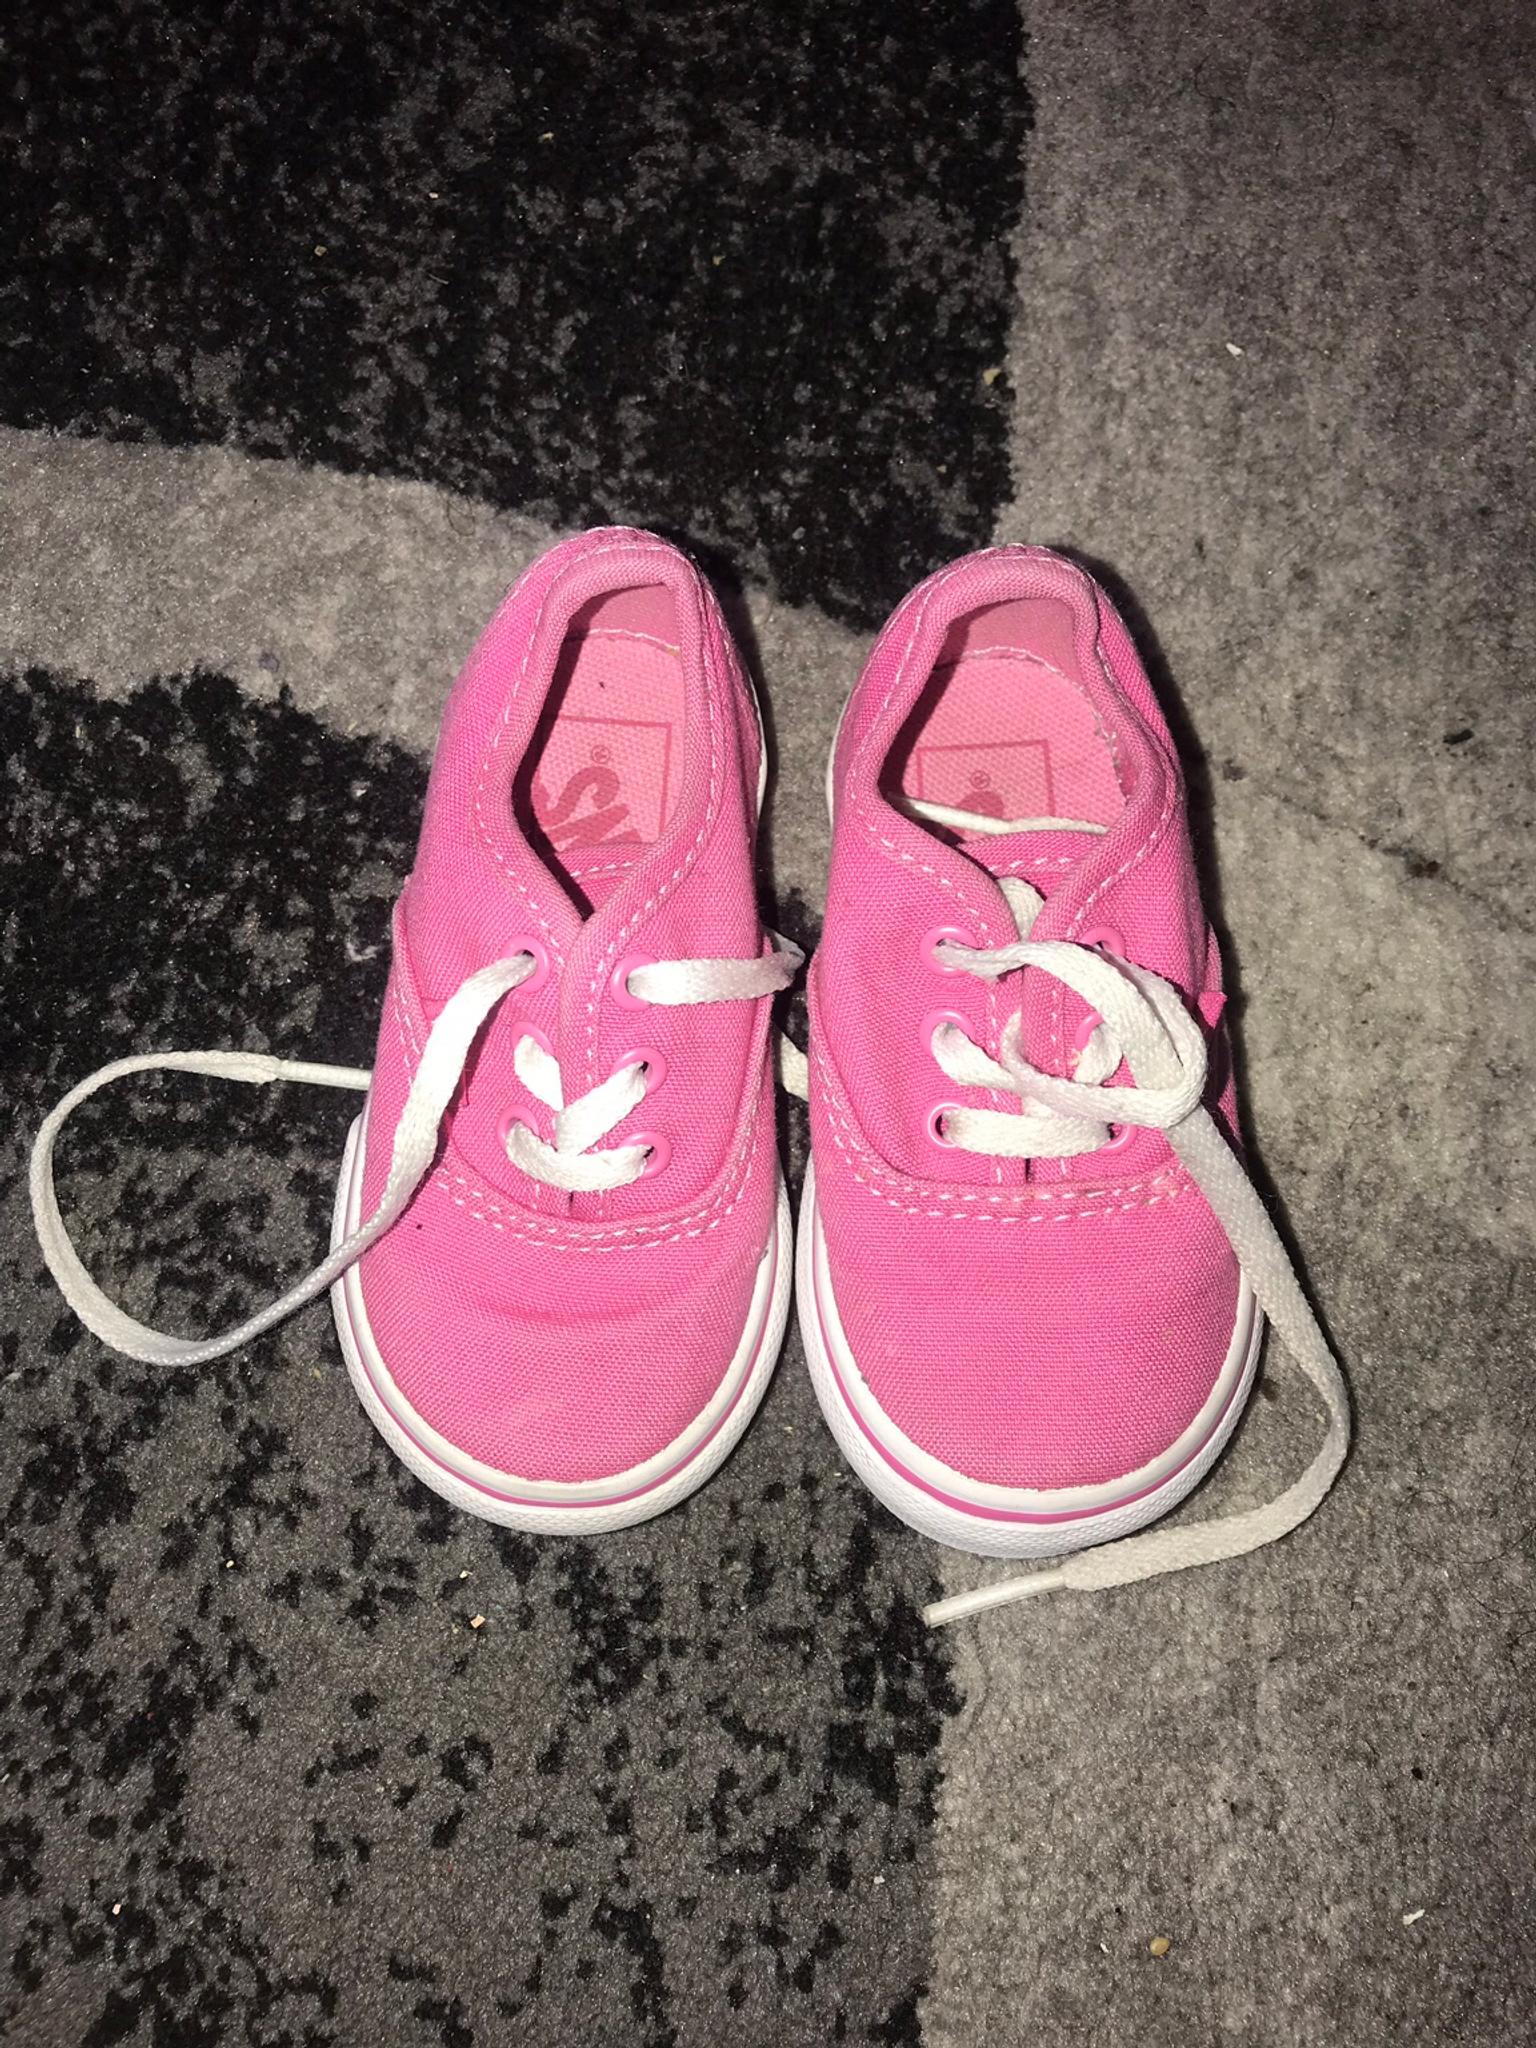 how to clean pink vans shoes